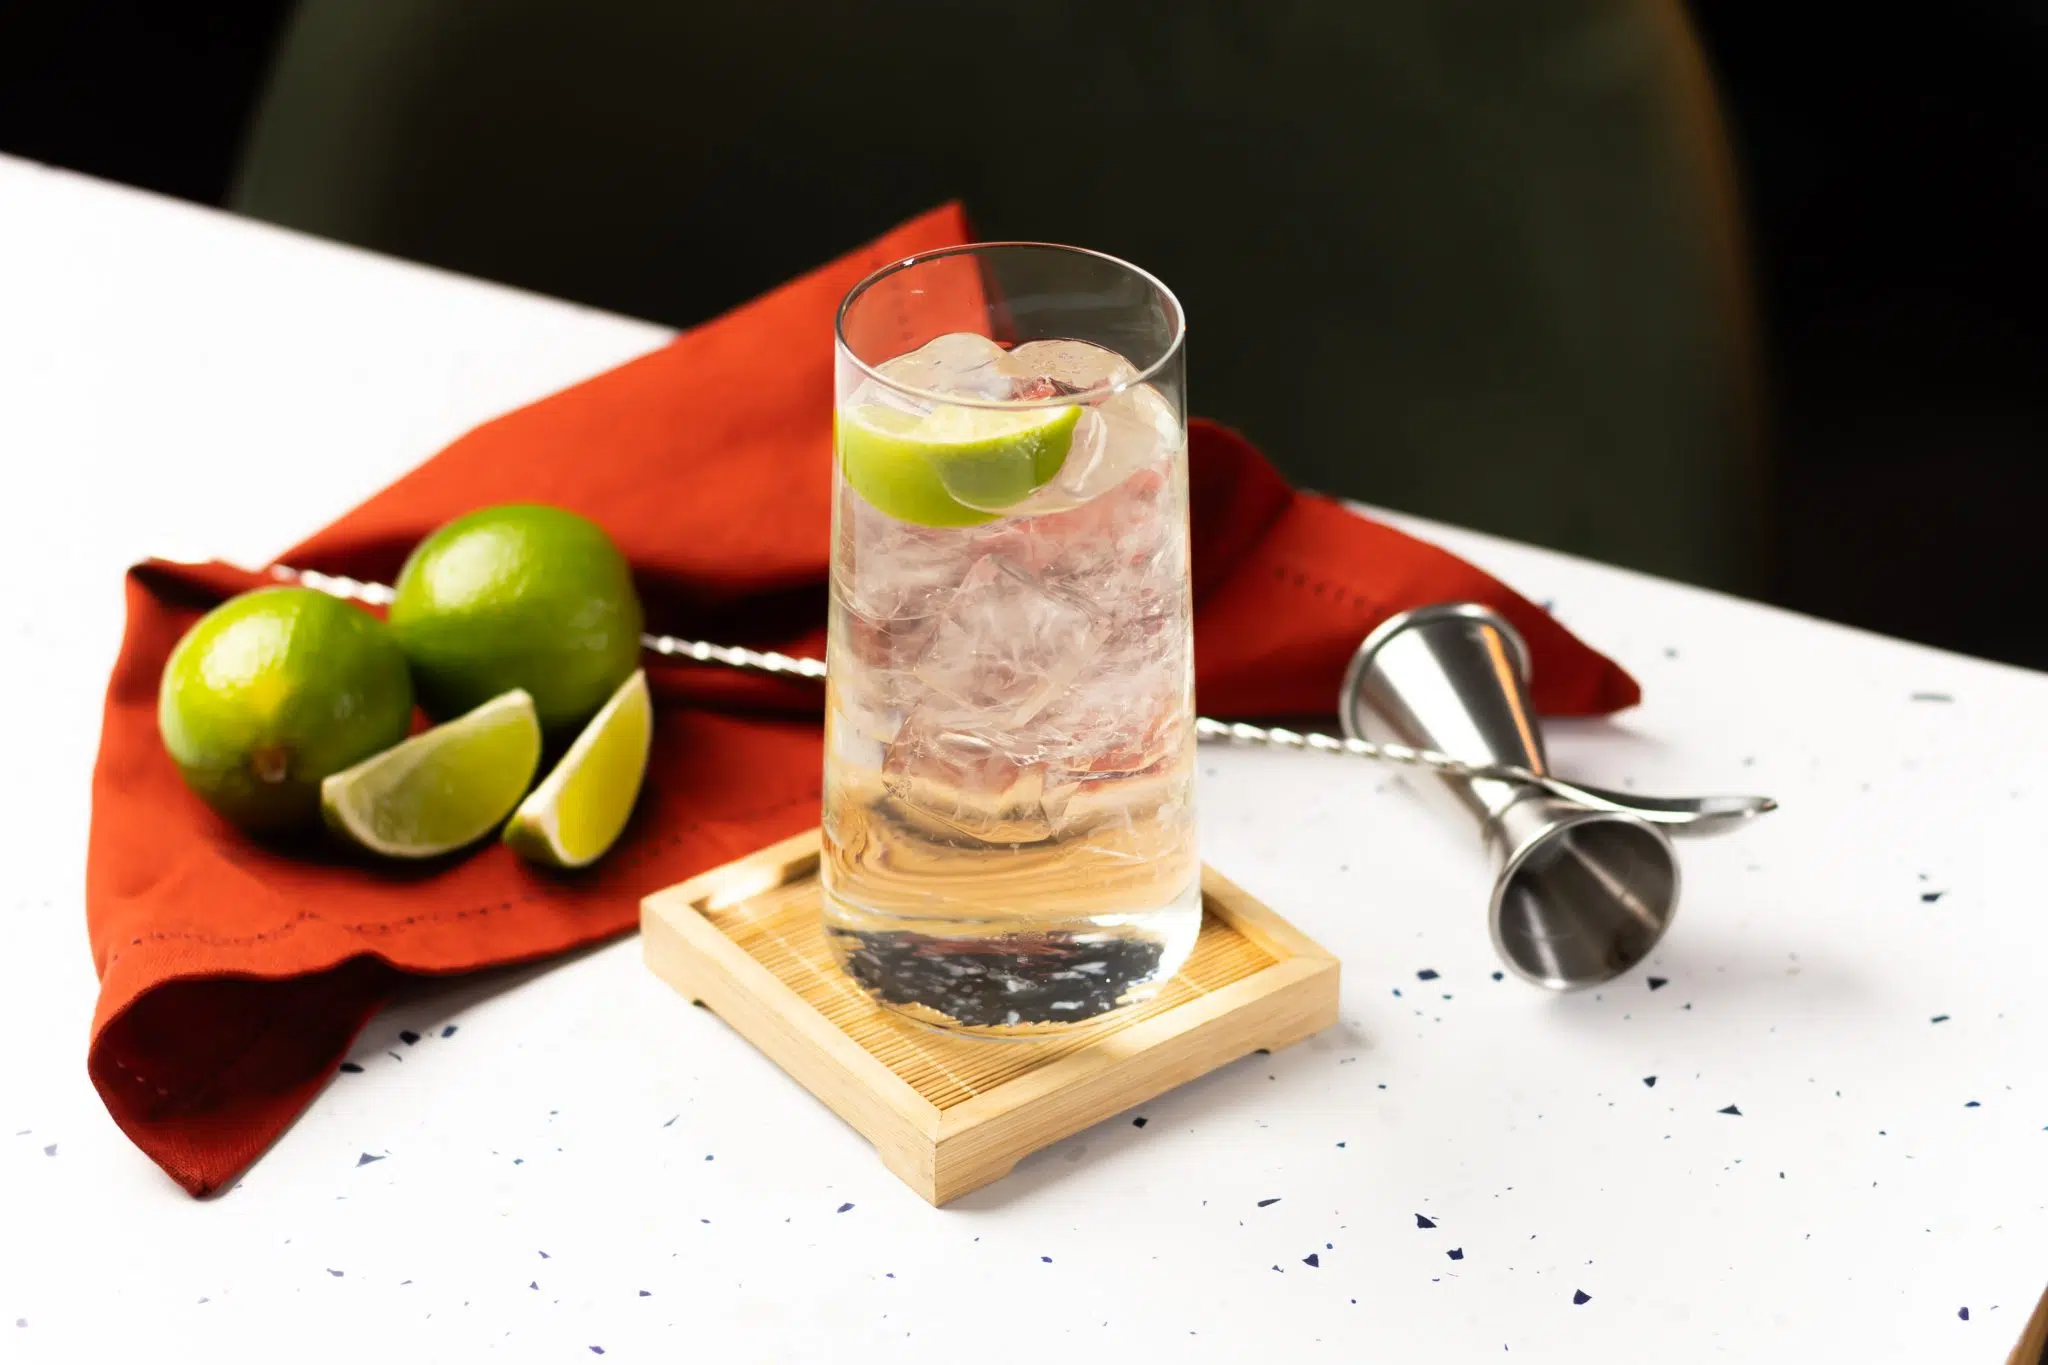 A side shot of a Tequila Tonic cocktail in a highball glass on a wooden coaster placed on a white bar table surrounded by a jigger, a bar spoon, two limes, two lime wedges anda red cloth.